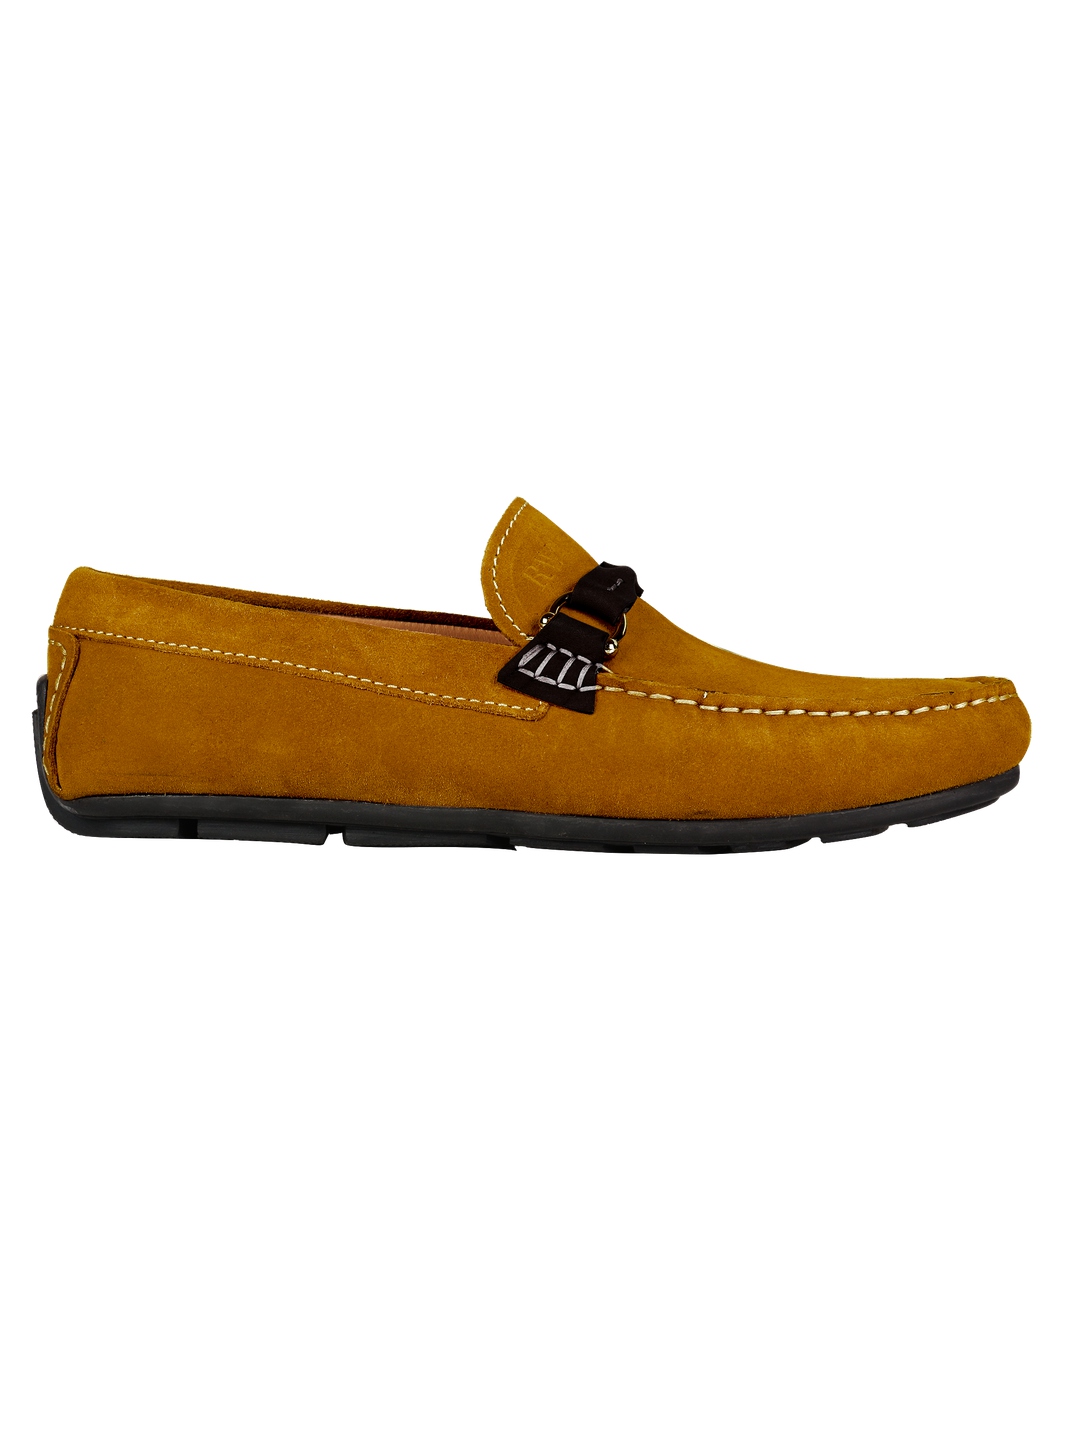 mustard color loafers